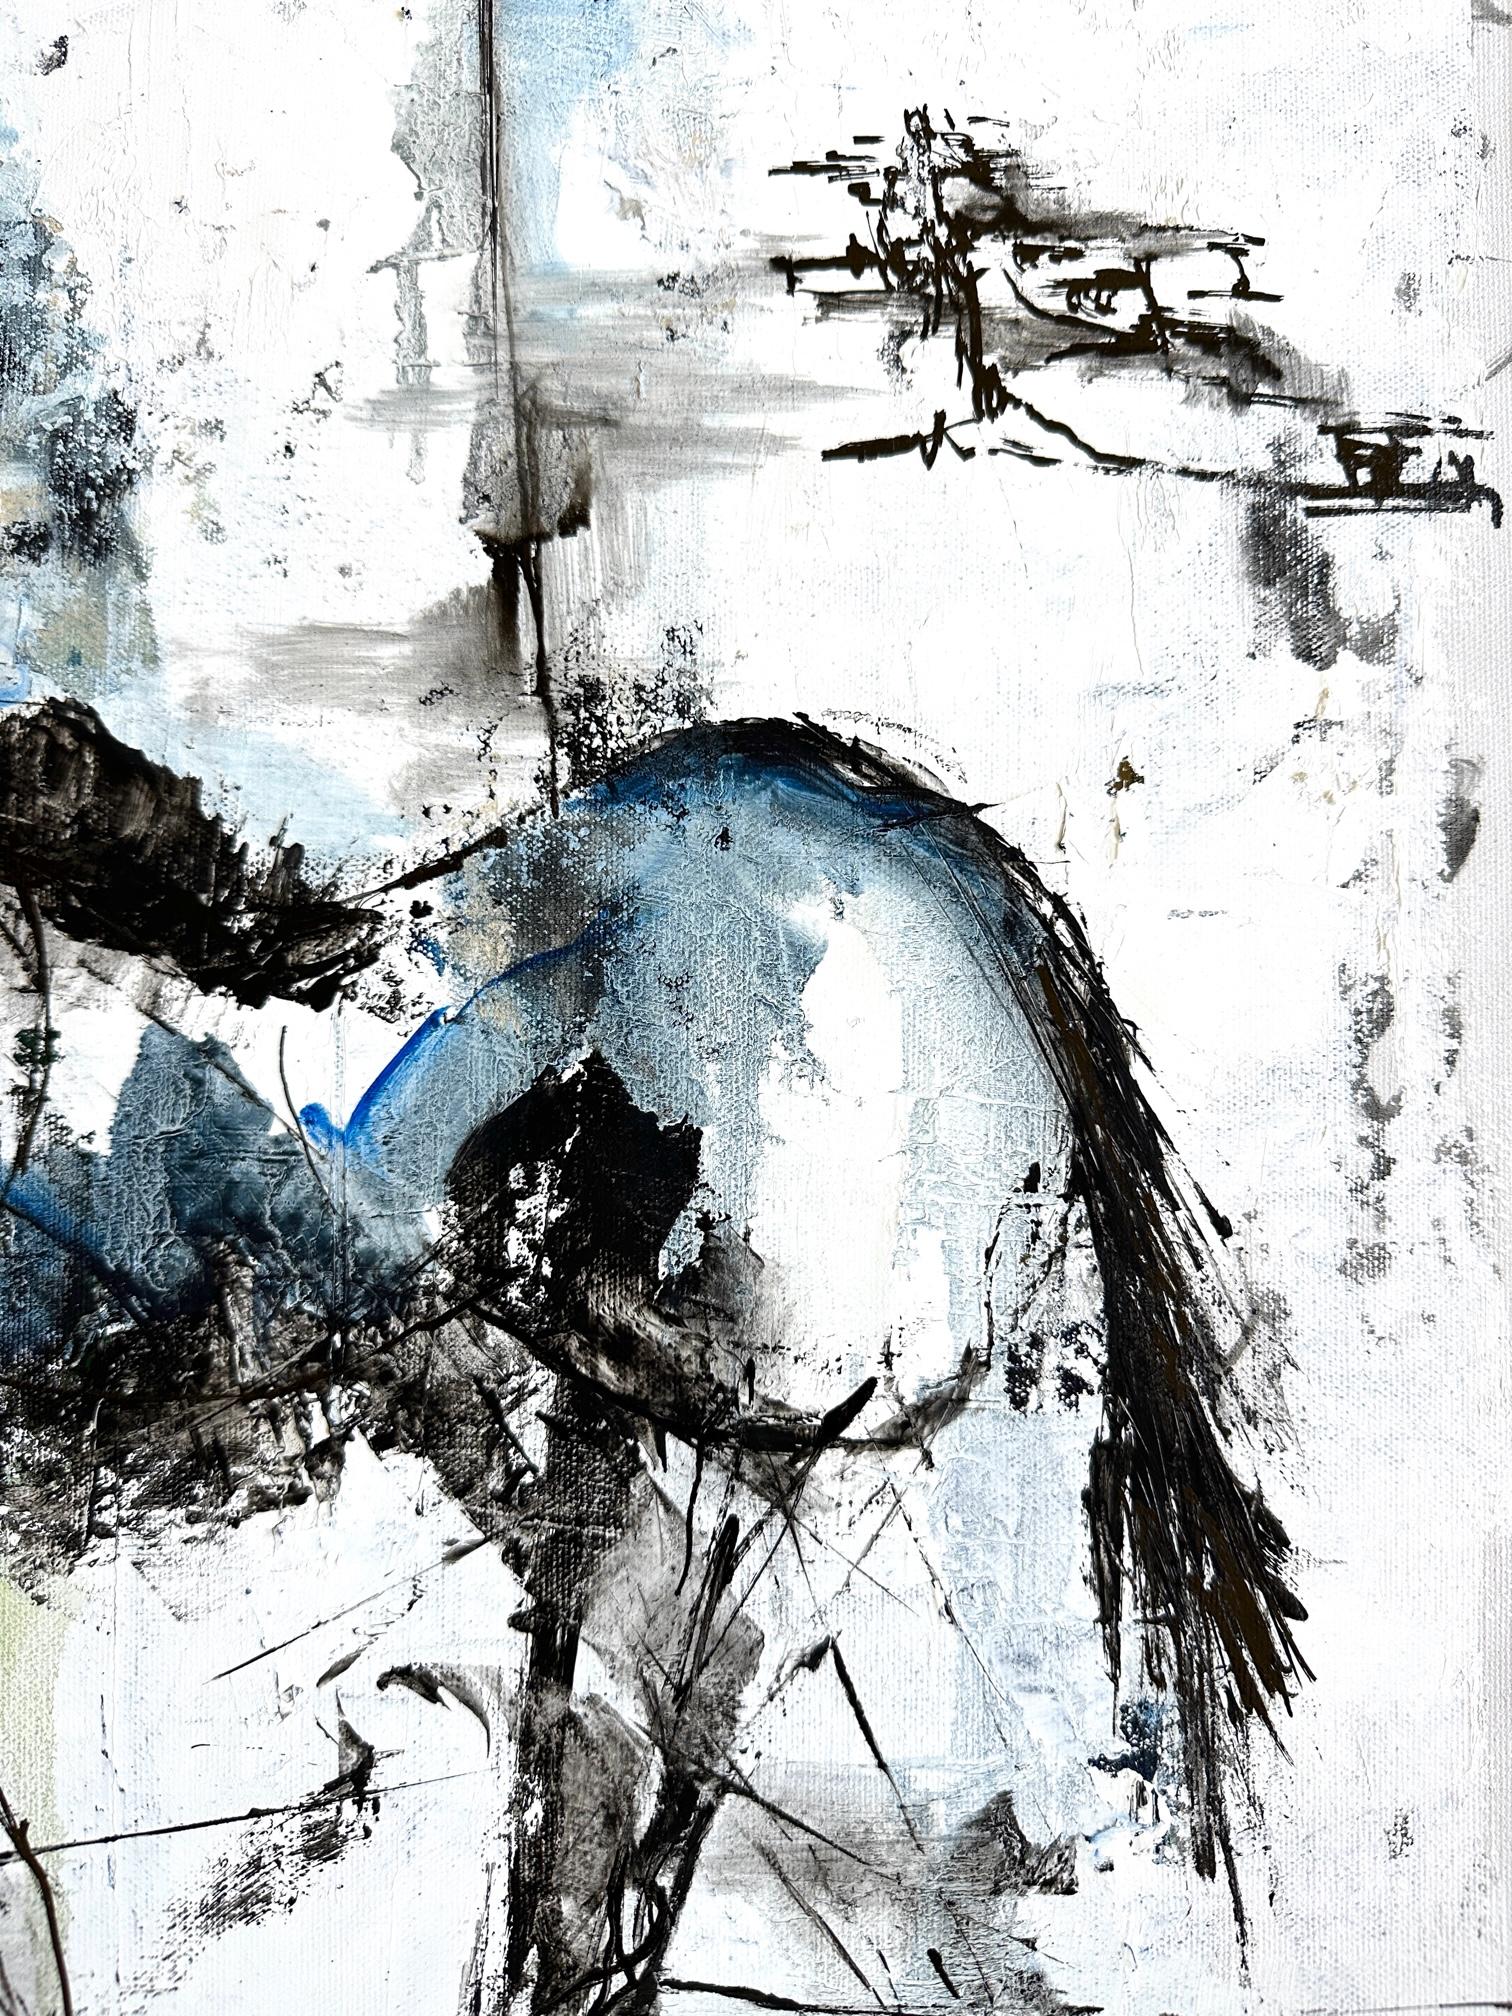 Abstract horse, abstract horse oil painting, messenger series horse on road.  - Gray Animal Painting by KOKO HOVAGUIMIAN